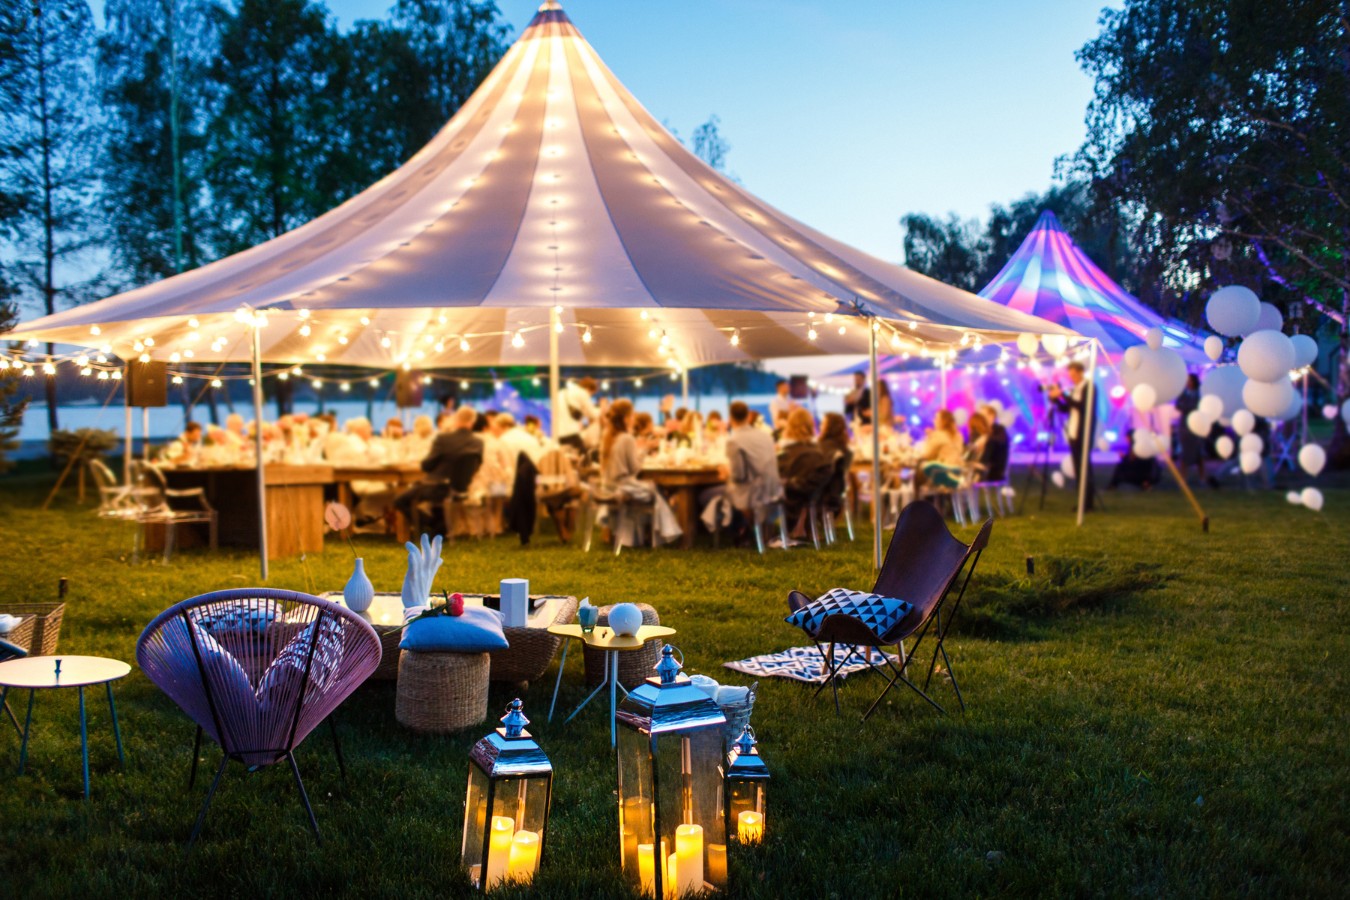 Hosting your School Event in a Tent: 5 Tips & Tricks to Make it a Success